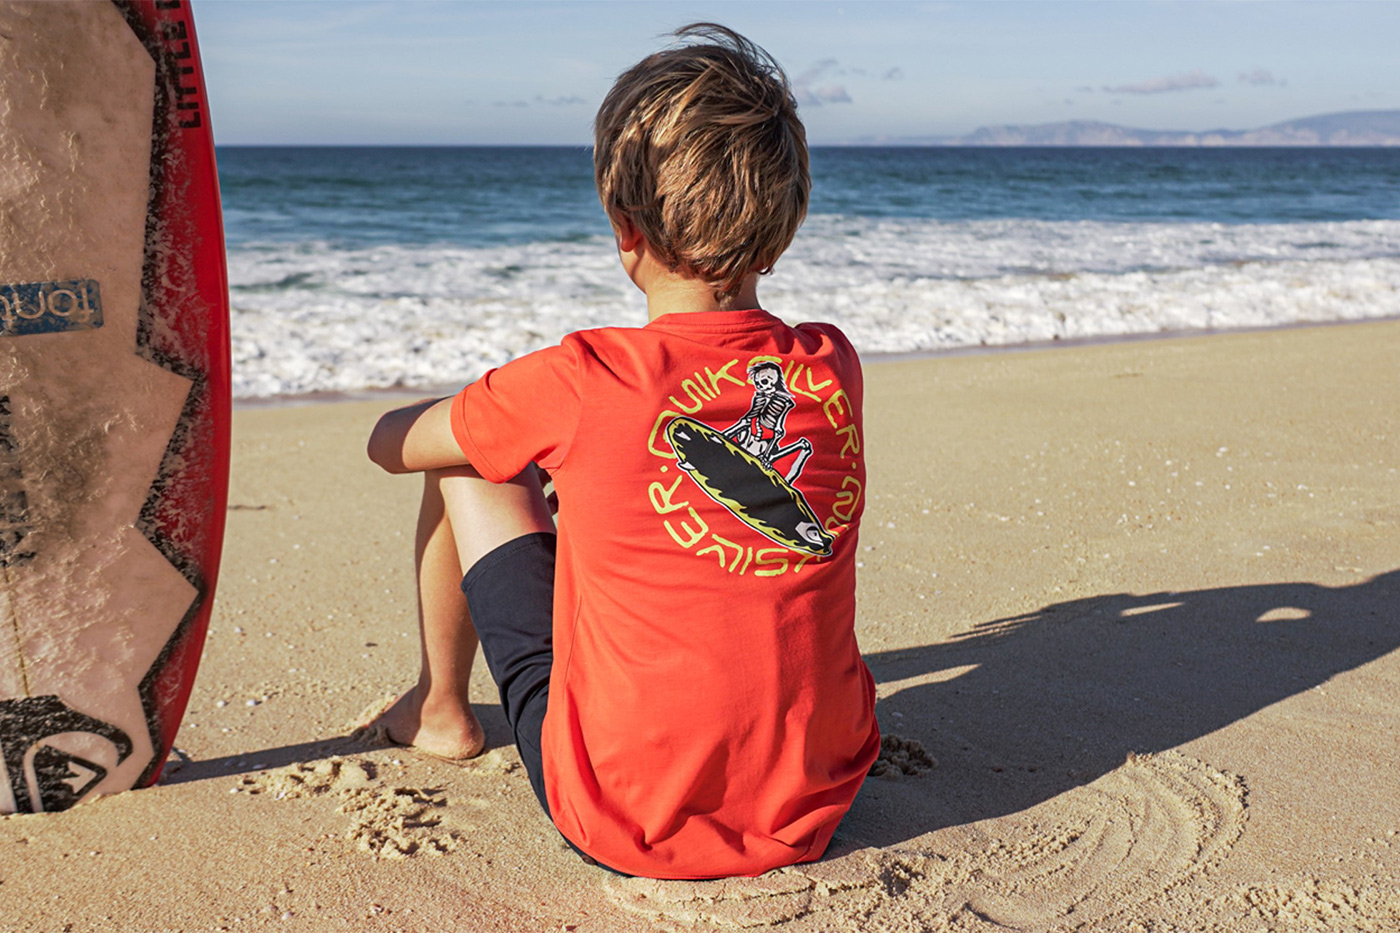 quiksilver-roxy-kid-collection-03